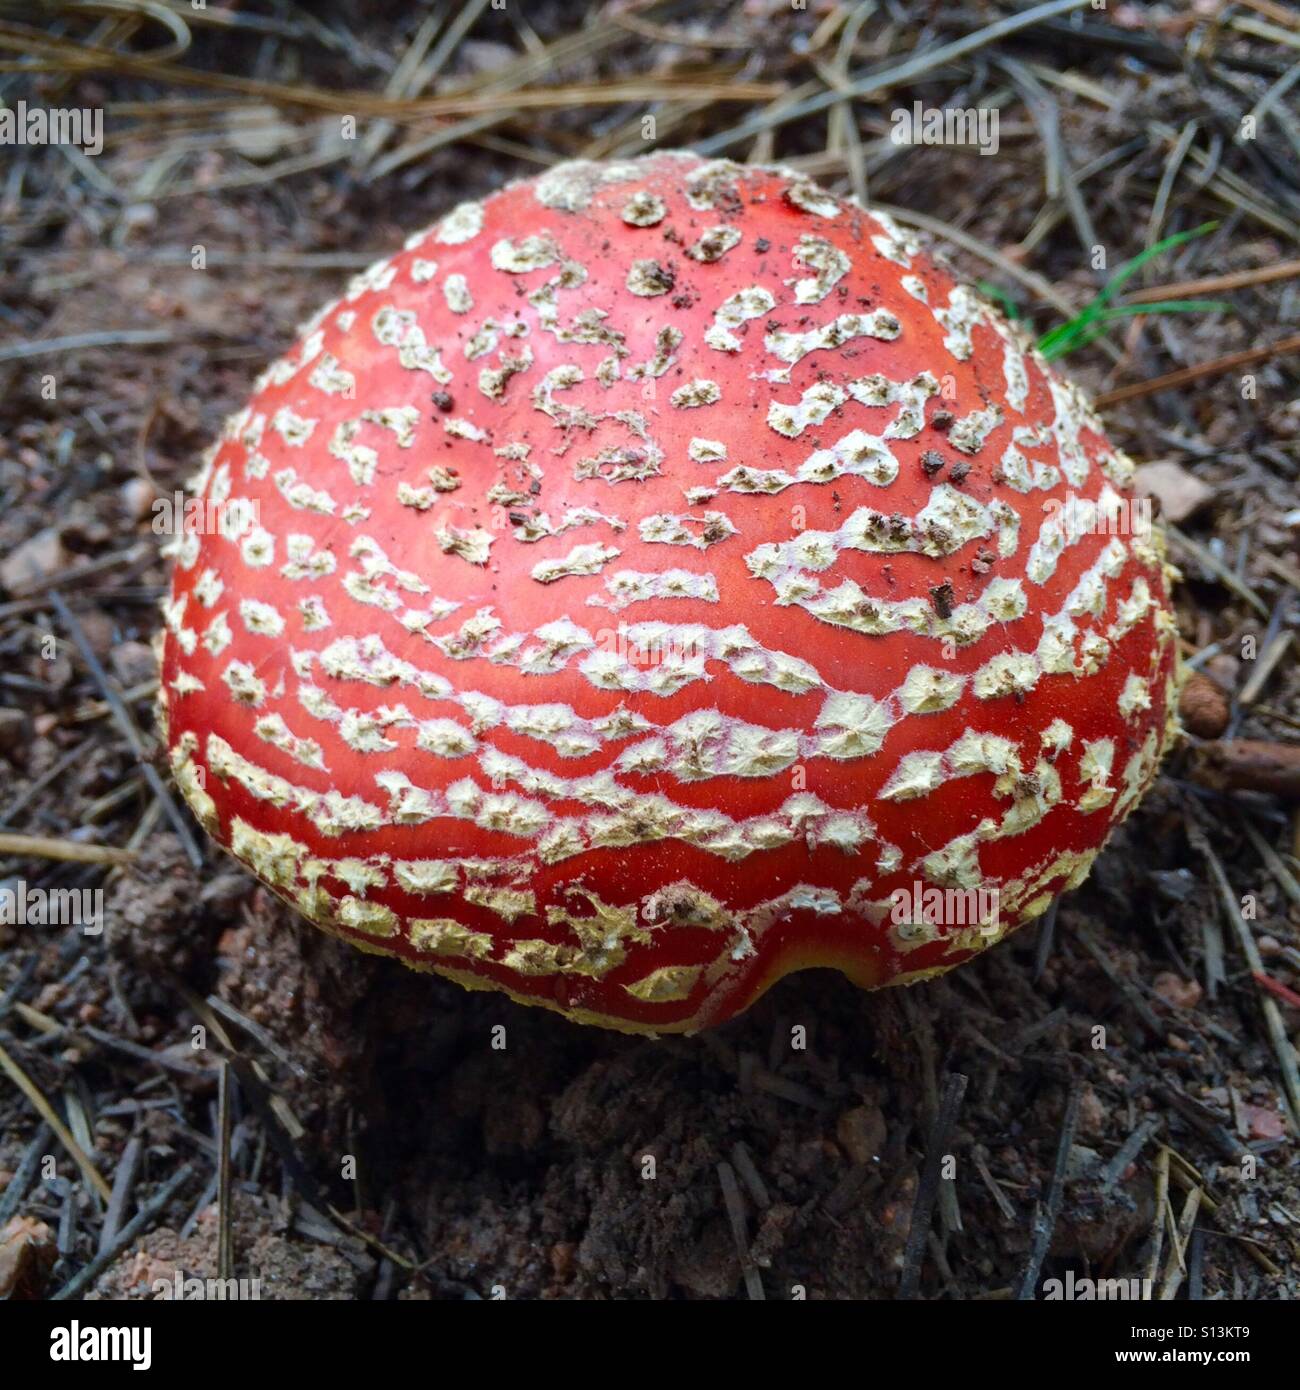 This is a photo of the mushroom called amanita muscaria. It is also called fly agaric or fly amanita and is known for its psychoactive properties. Stock Photo